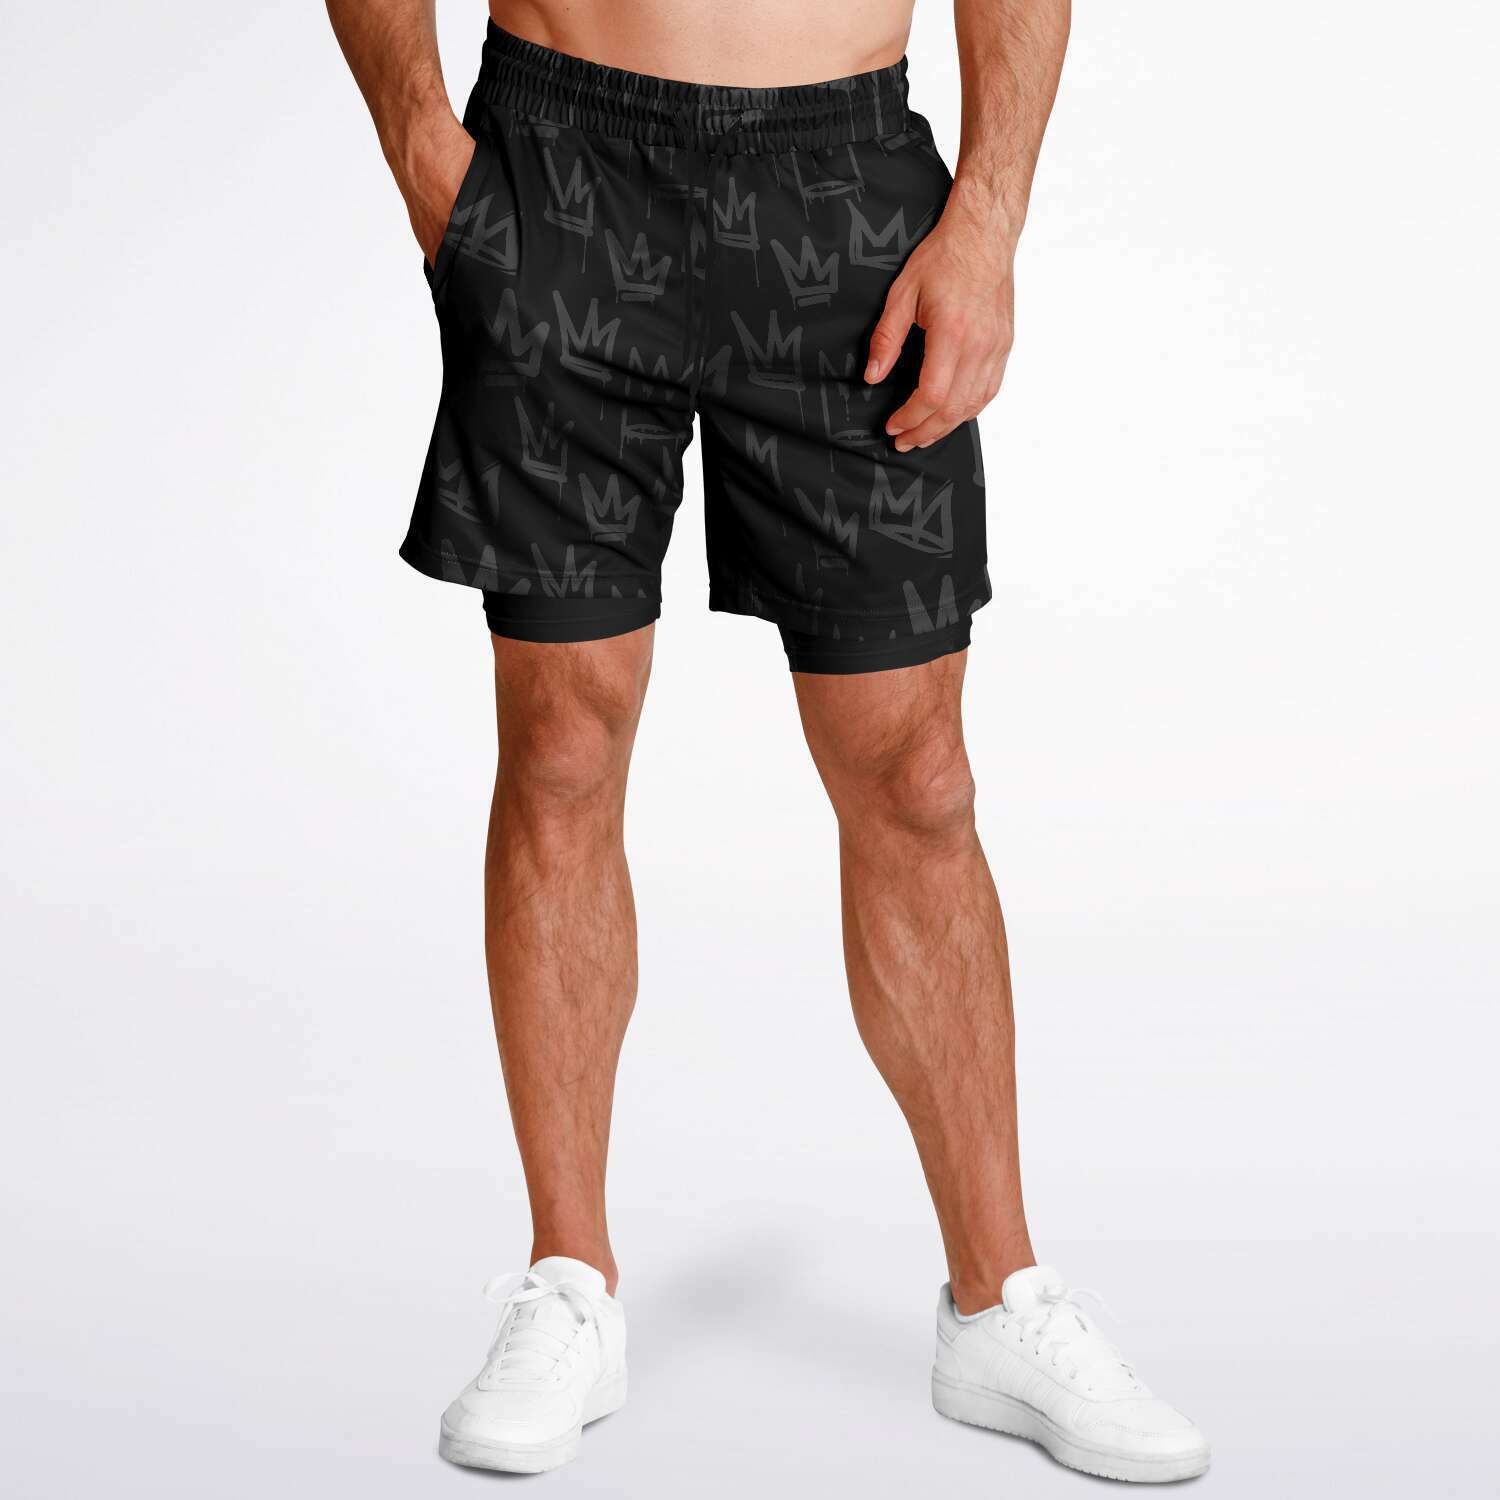 We Are Kings Shorts